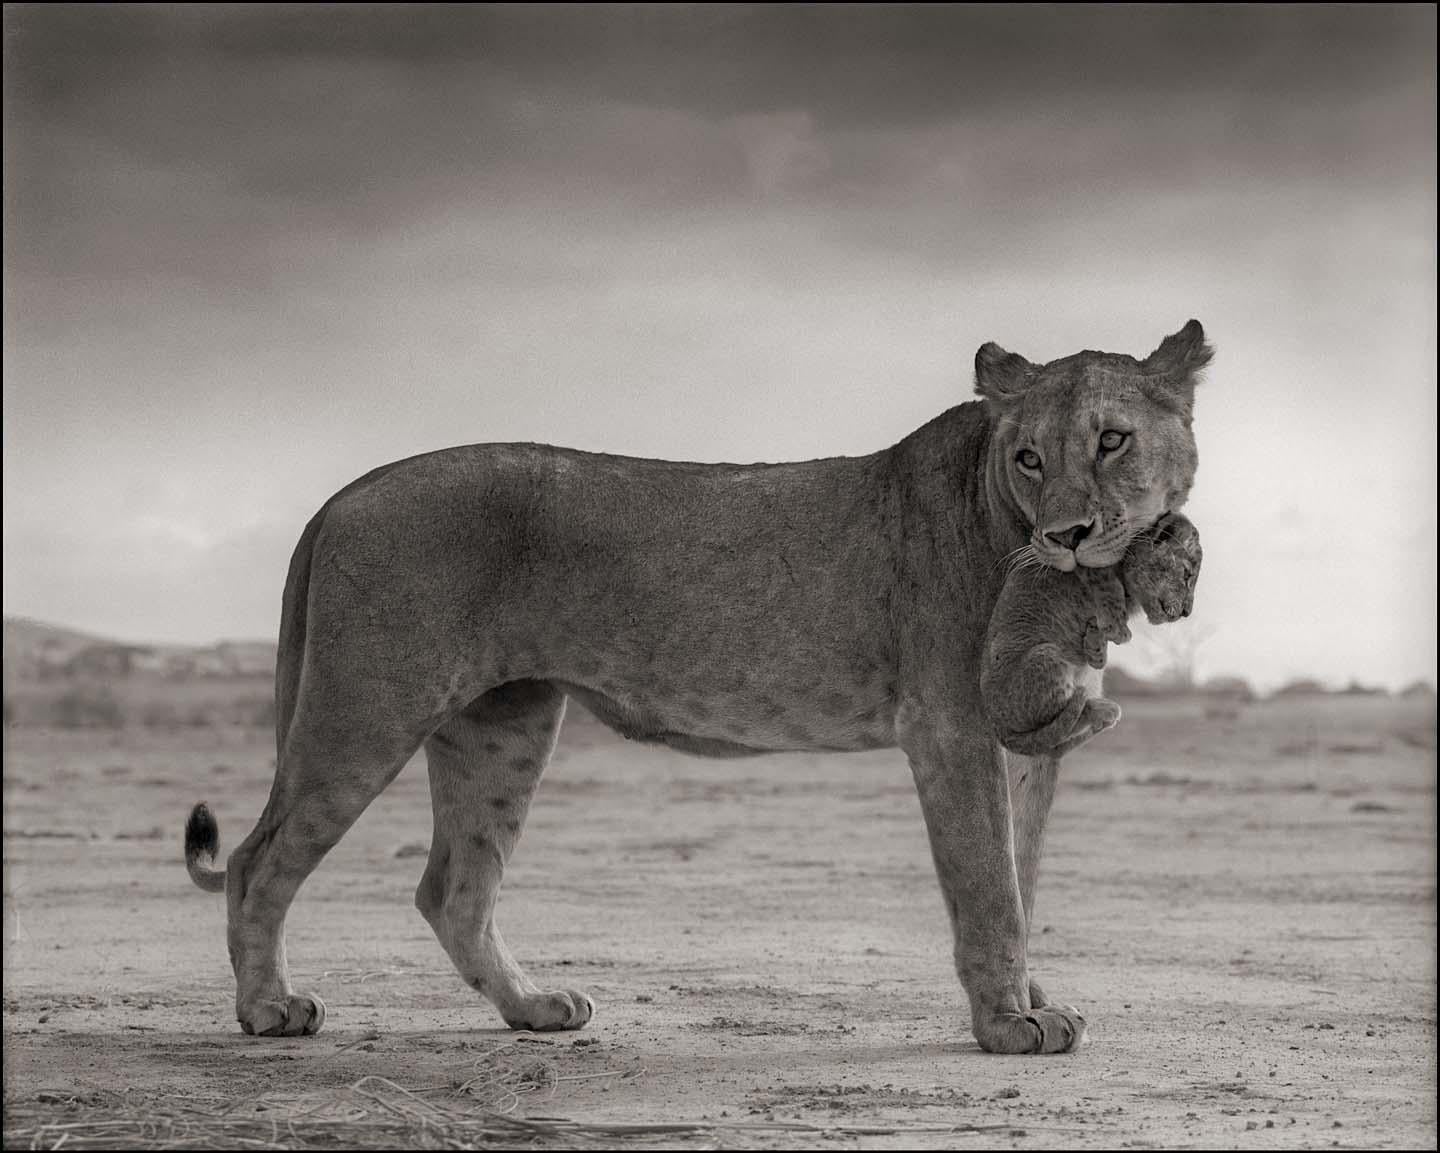 Lioness Holding Cub in Mouth, Maasai Mara – Nick Brandt, Lion, Africa, Animals